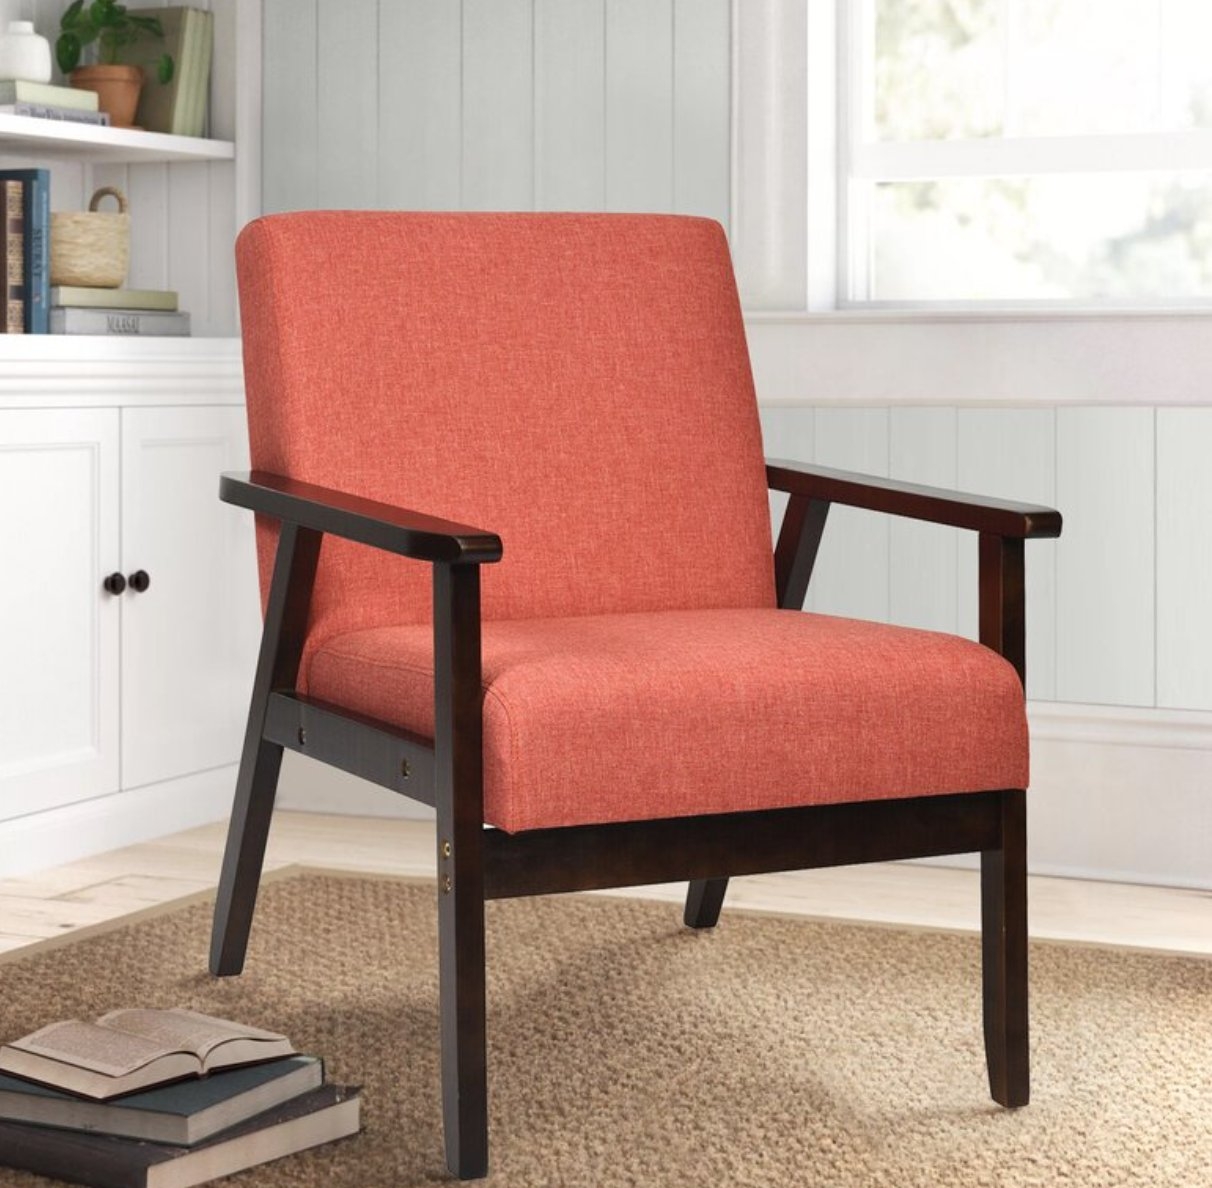 Solid Rubber Wood Accent Armchair - Image 1